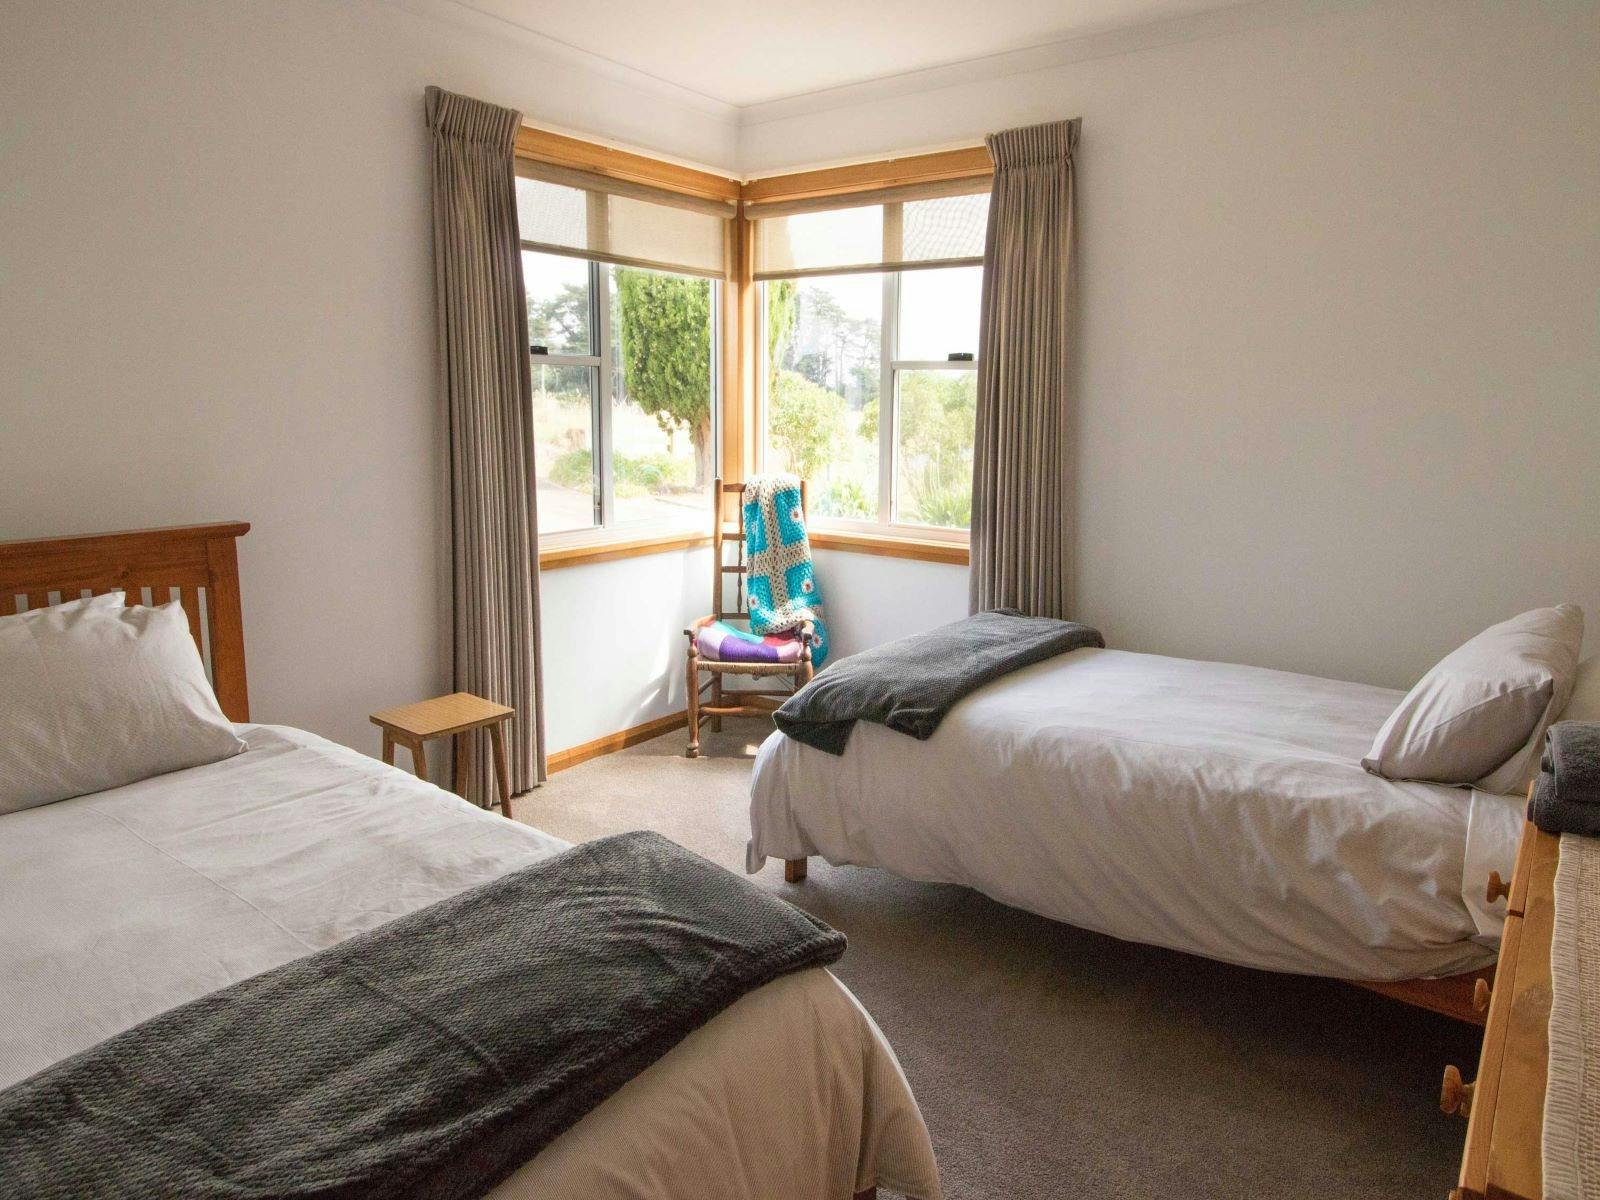 Twin bedroom with two single beds and windows looking out to front garden